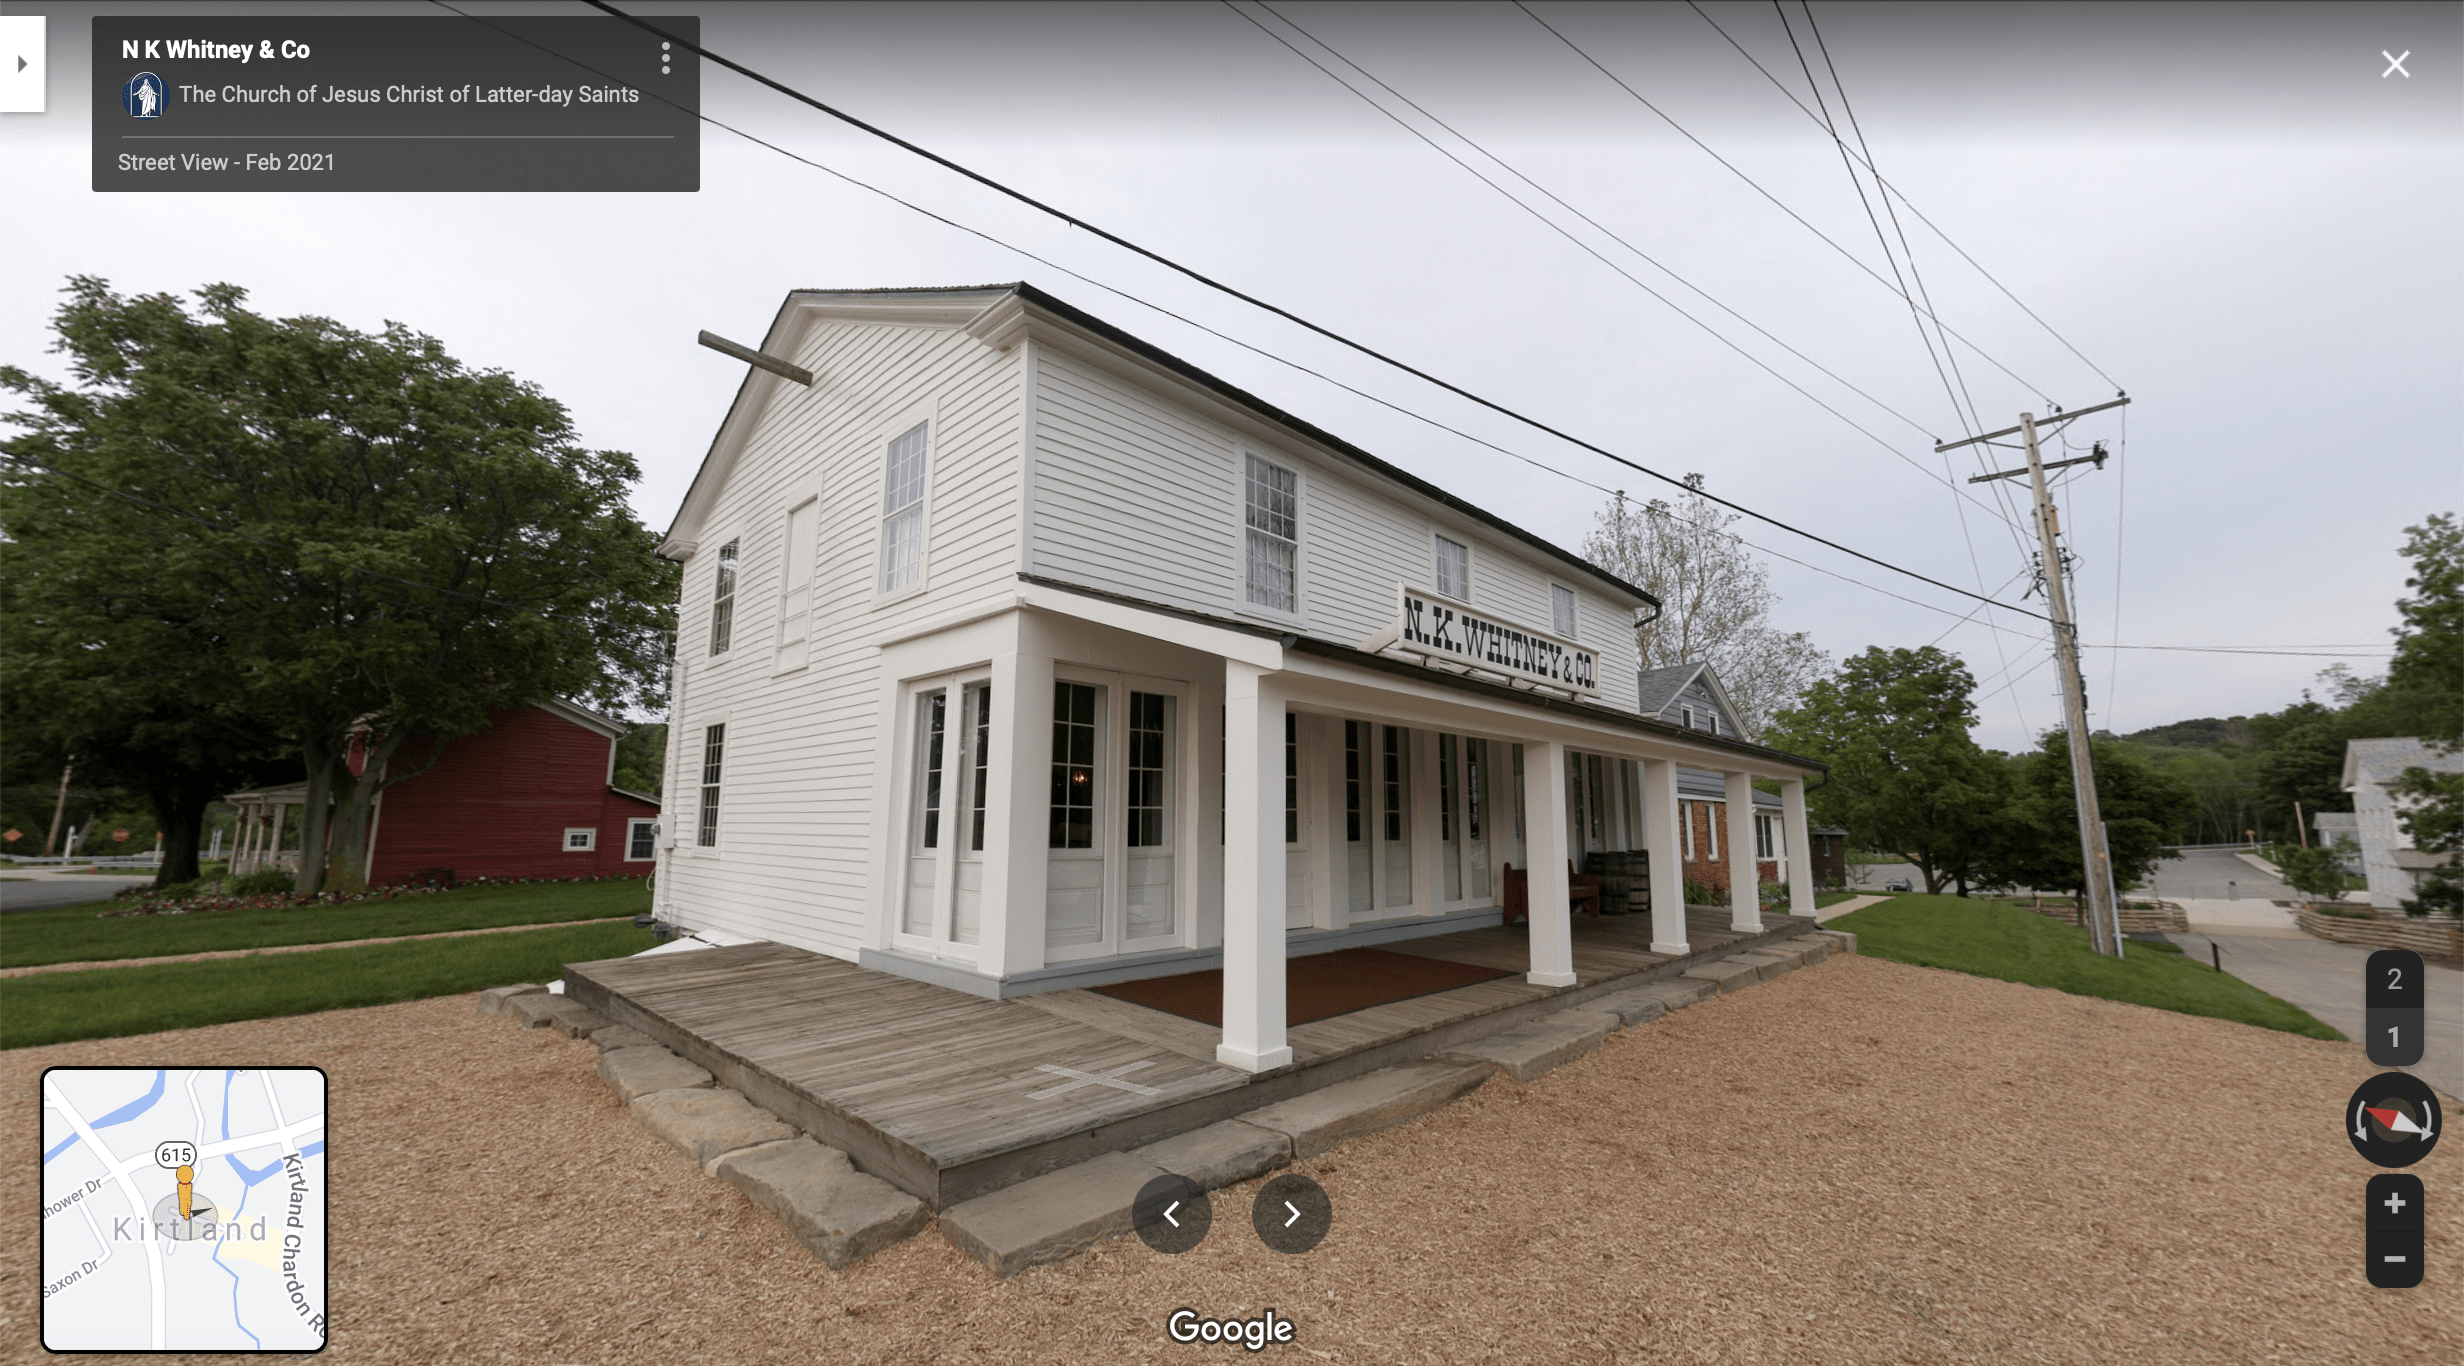 Screenshot of the Google Maps 360 view of the Newell K. Whitney Store